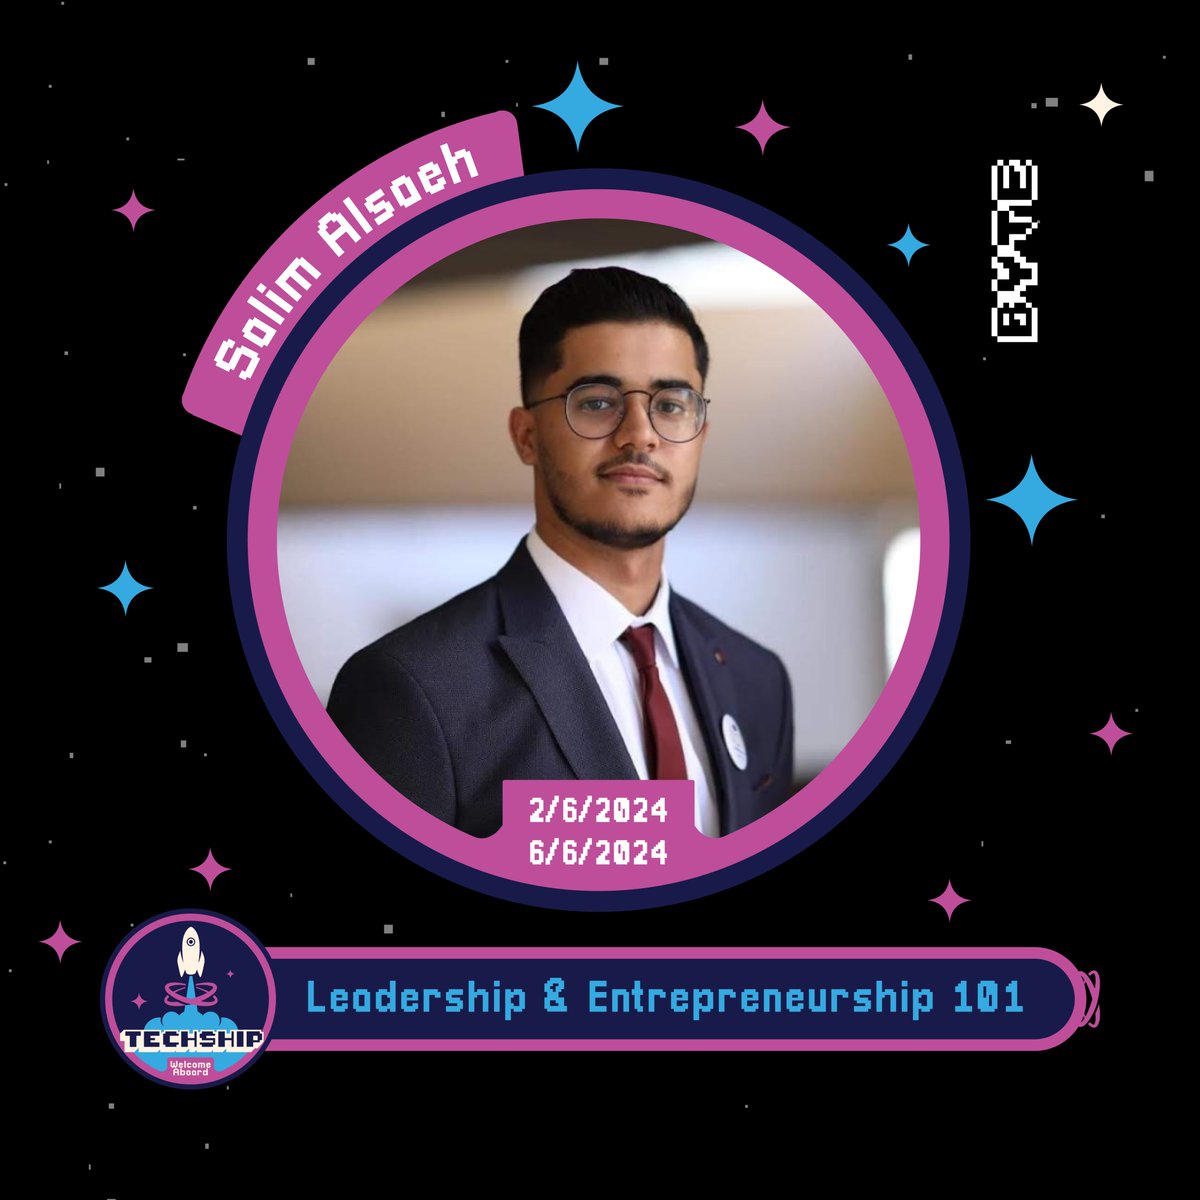 TechShip 4th Trip 🚀
Leadership & Entrepreneurship 101
🎙️ Lead by: Salim Alsaeh
🗓️ Date: Sunday 2nd of June - Thursday 6th of June
🕟 Time: 4:30 PM - 8:00 PM

#TechShip 🚀
Welcome Aboard!
Funded by US State Department through Alumni Engagement Innovation Fund (AEIF)